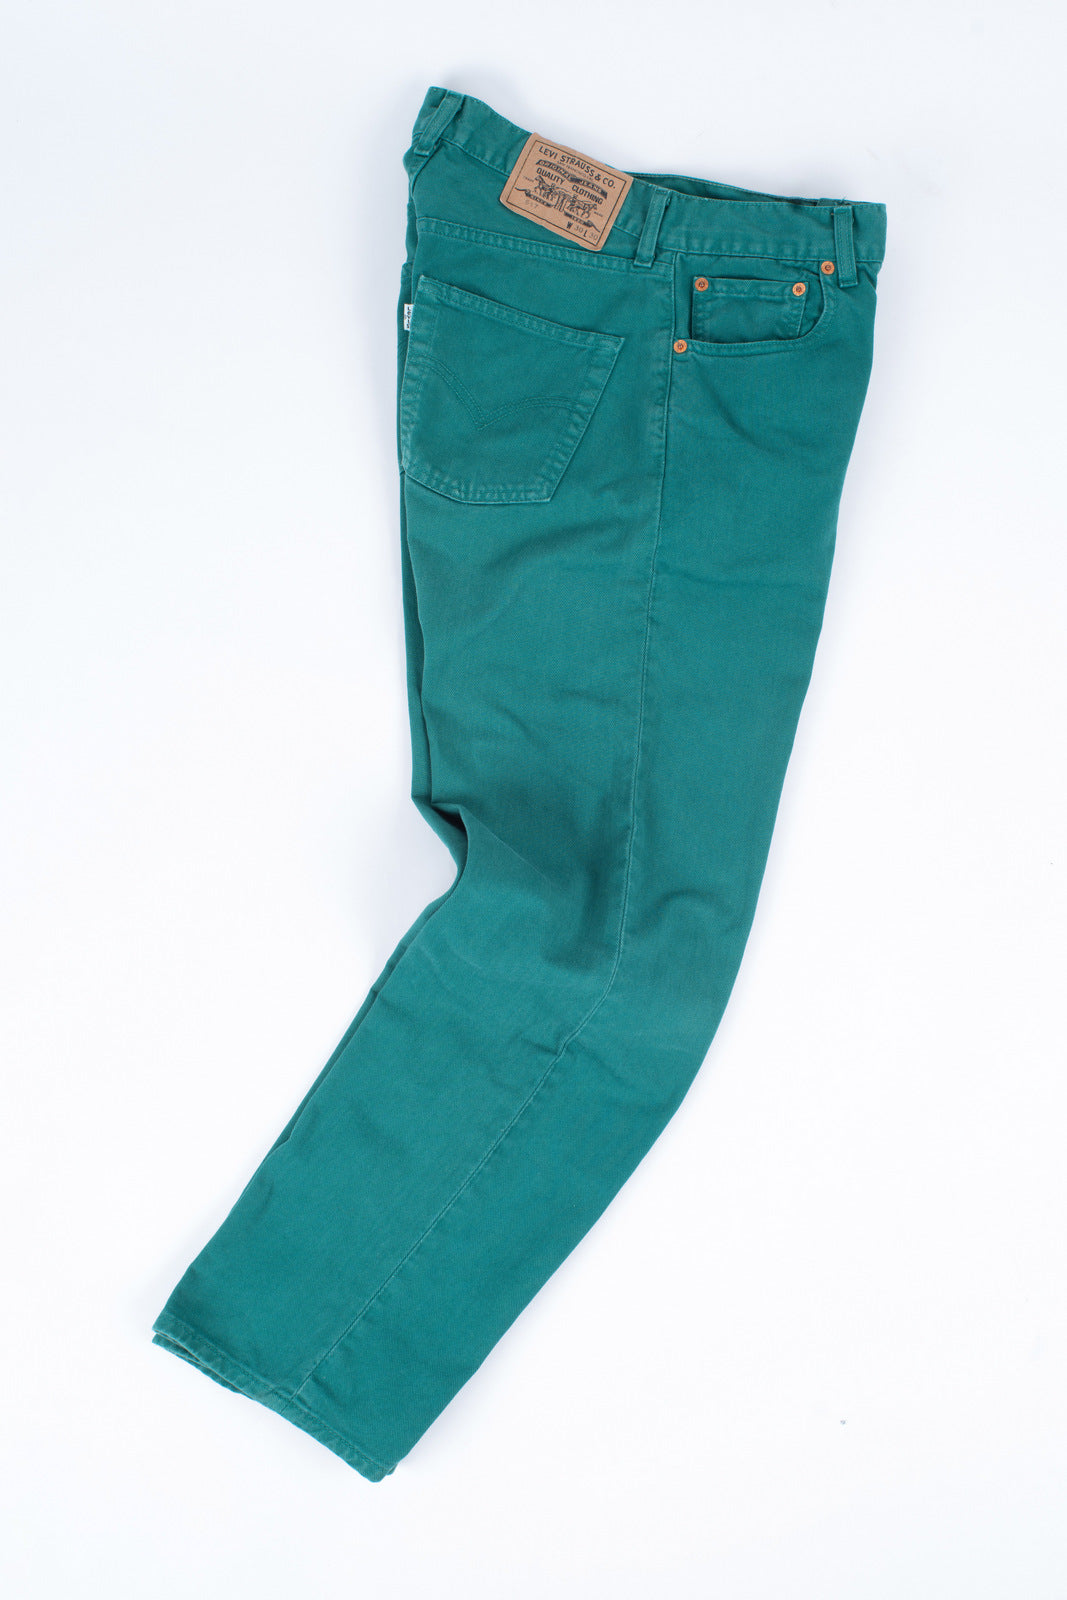 Levi’s 517 White Tab Vintage Green Jeans Made in Italy, W30/L30